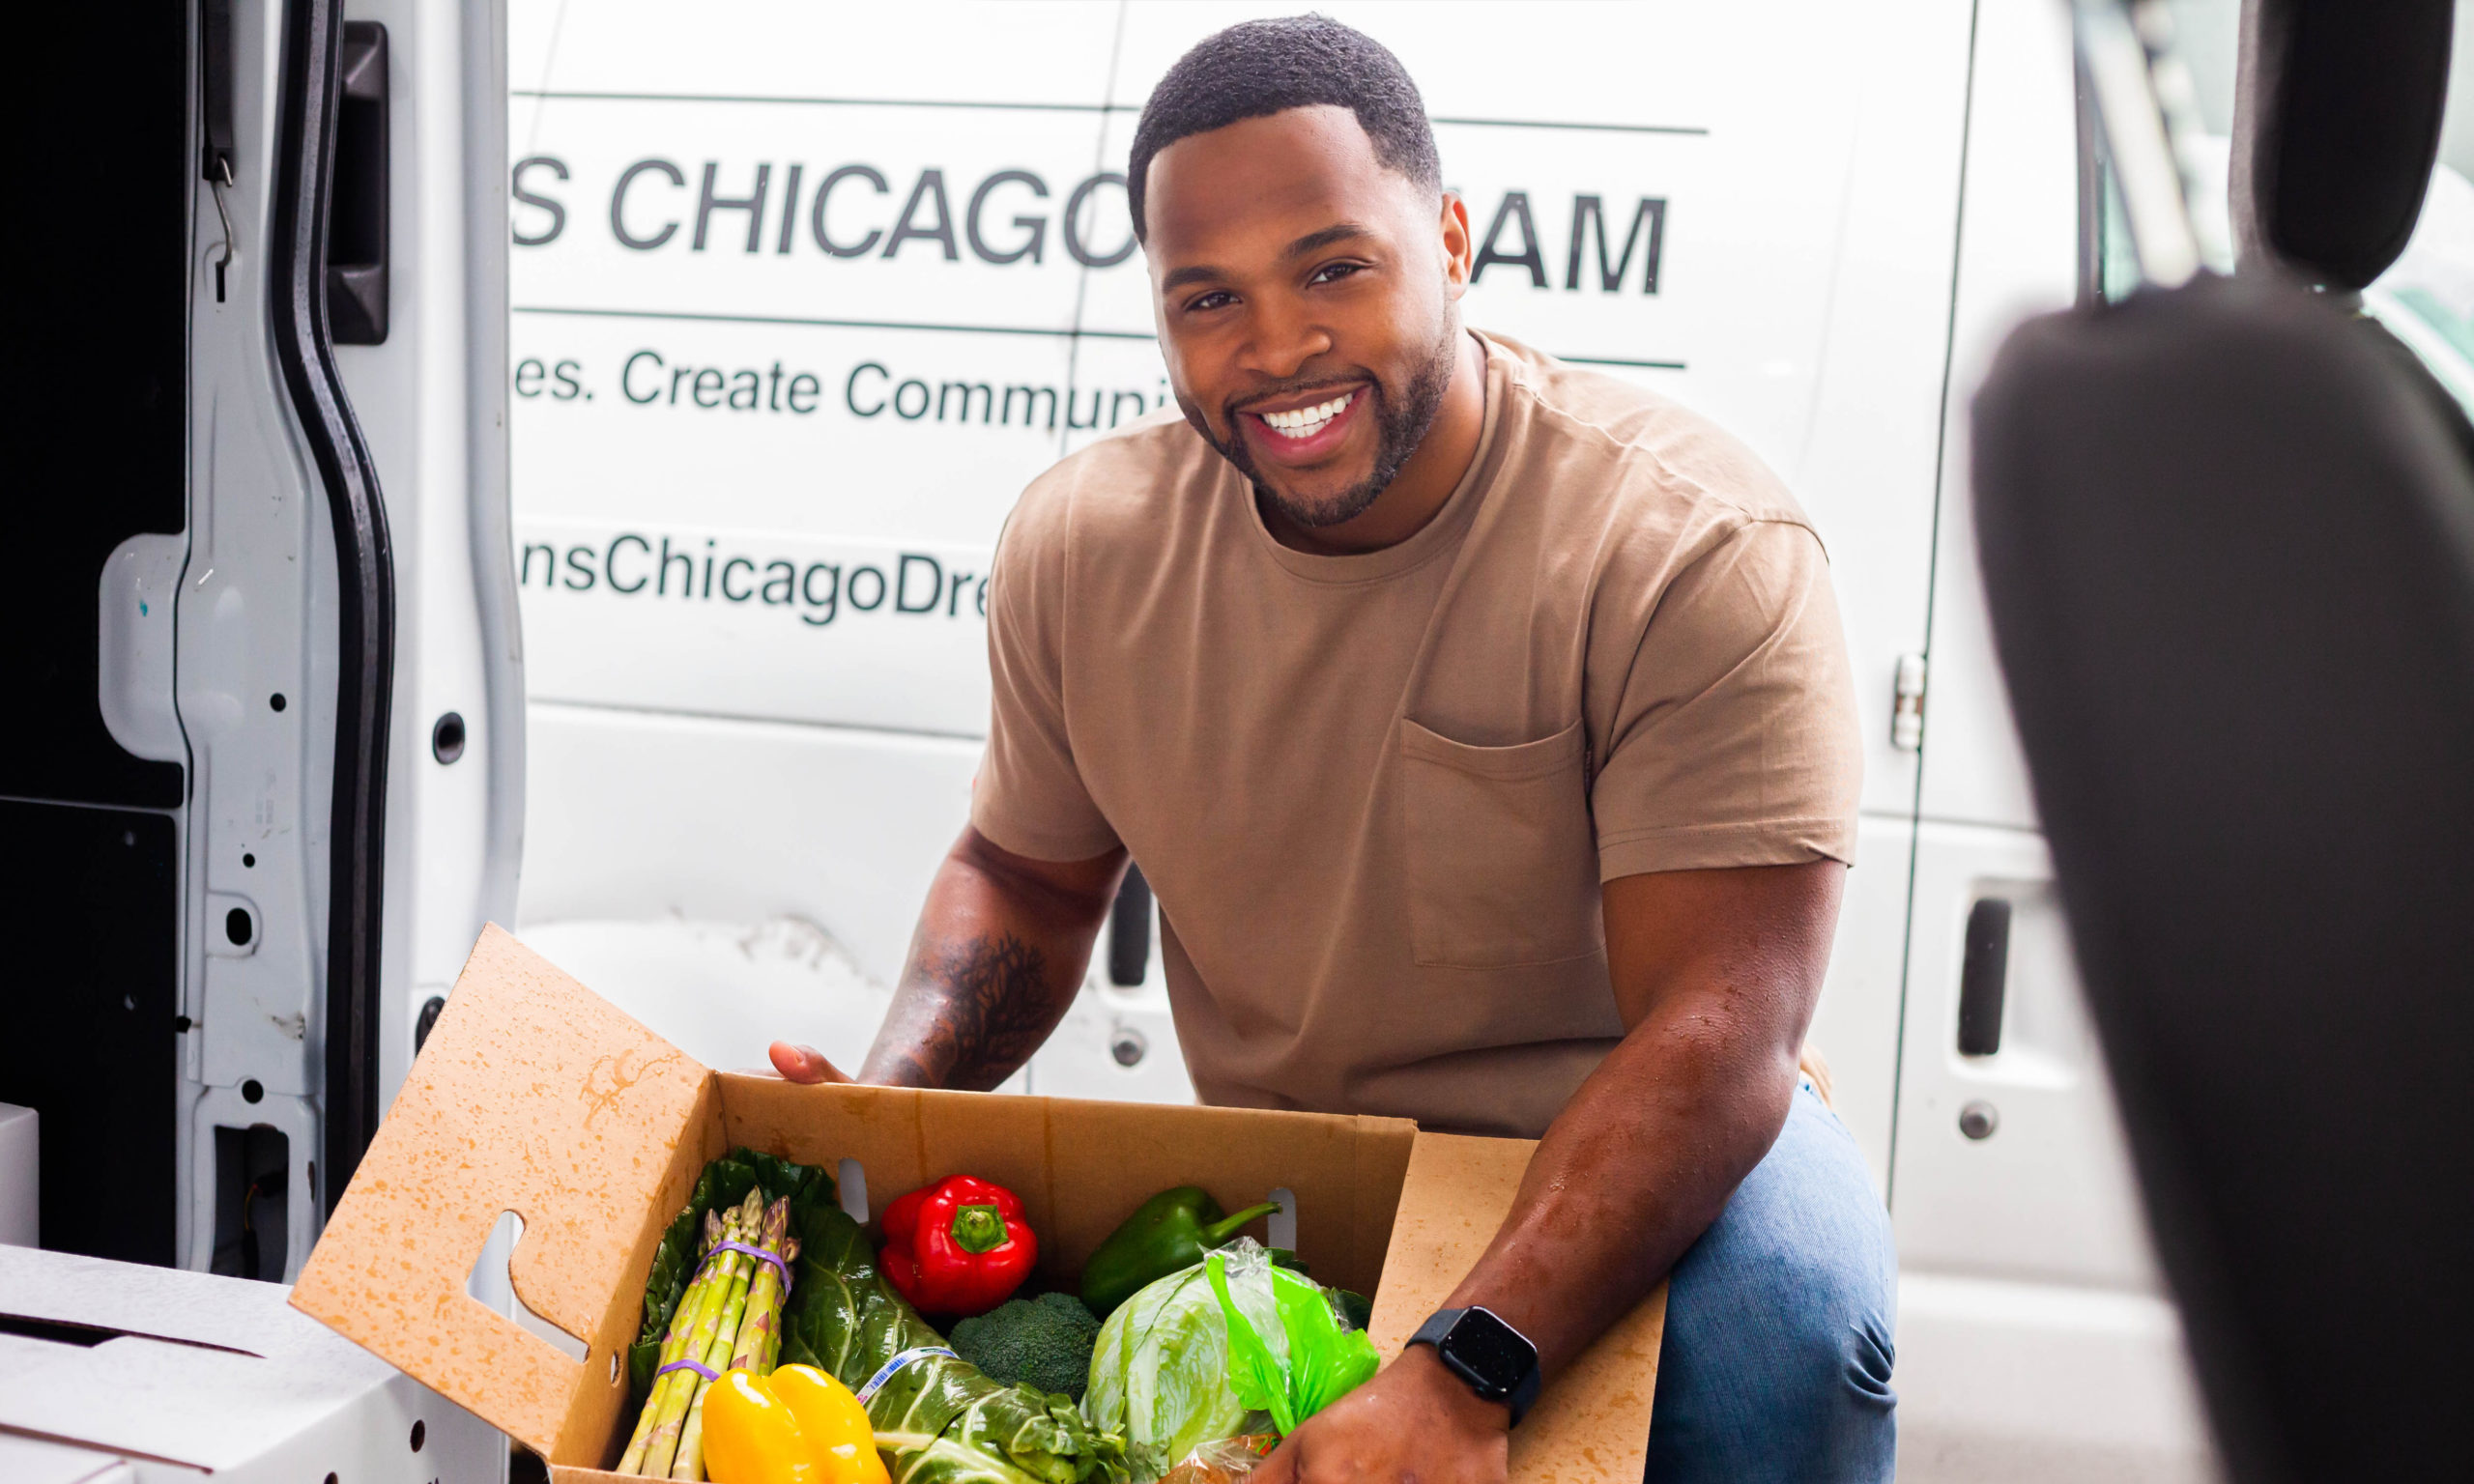 SOUTH SIDE HEALTHY COMMUNITY ORGANIZATION INVESTS NEARLY $1 MILLION IN COMMUNITY RESOURCES